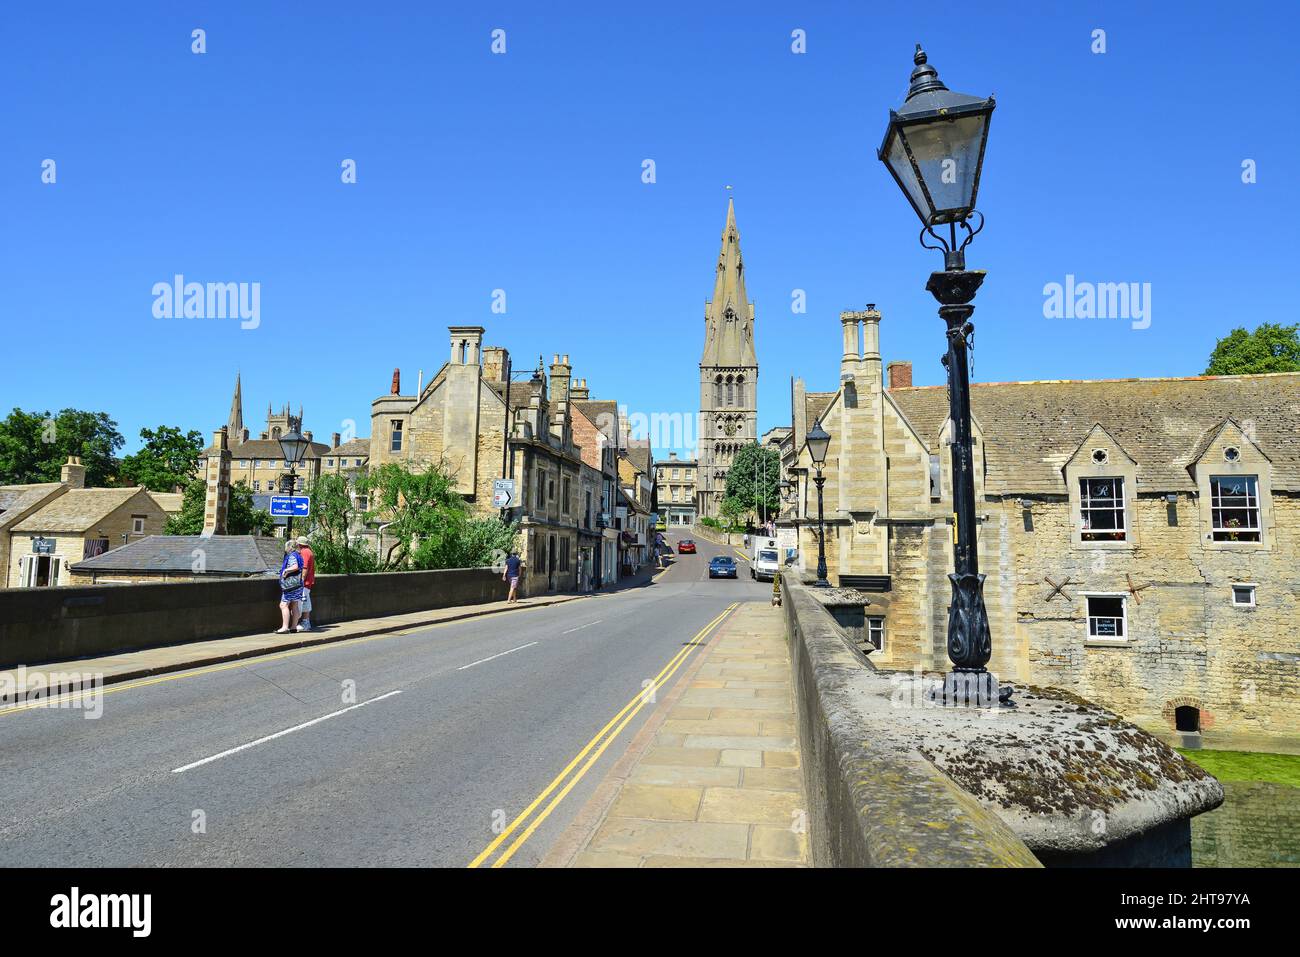 St Mary's Church and St Mary's Hill from Town Bridge, Stamford, Lincolnshire, England, United Kingdom Stock Photo